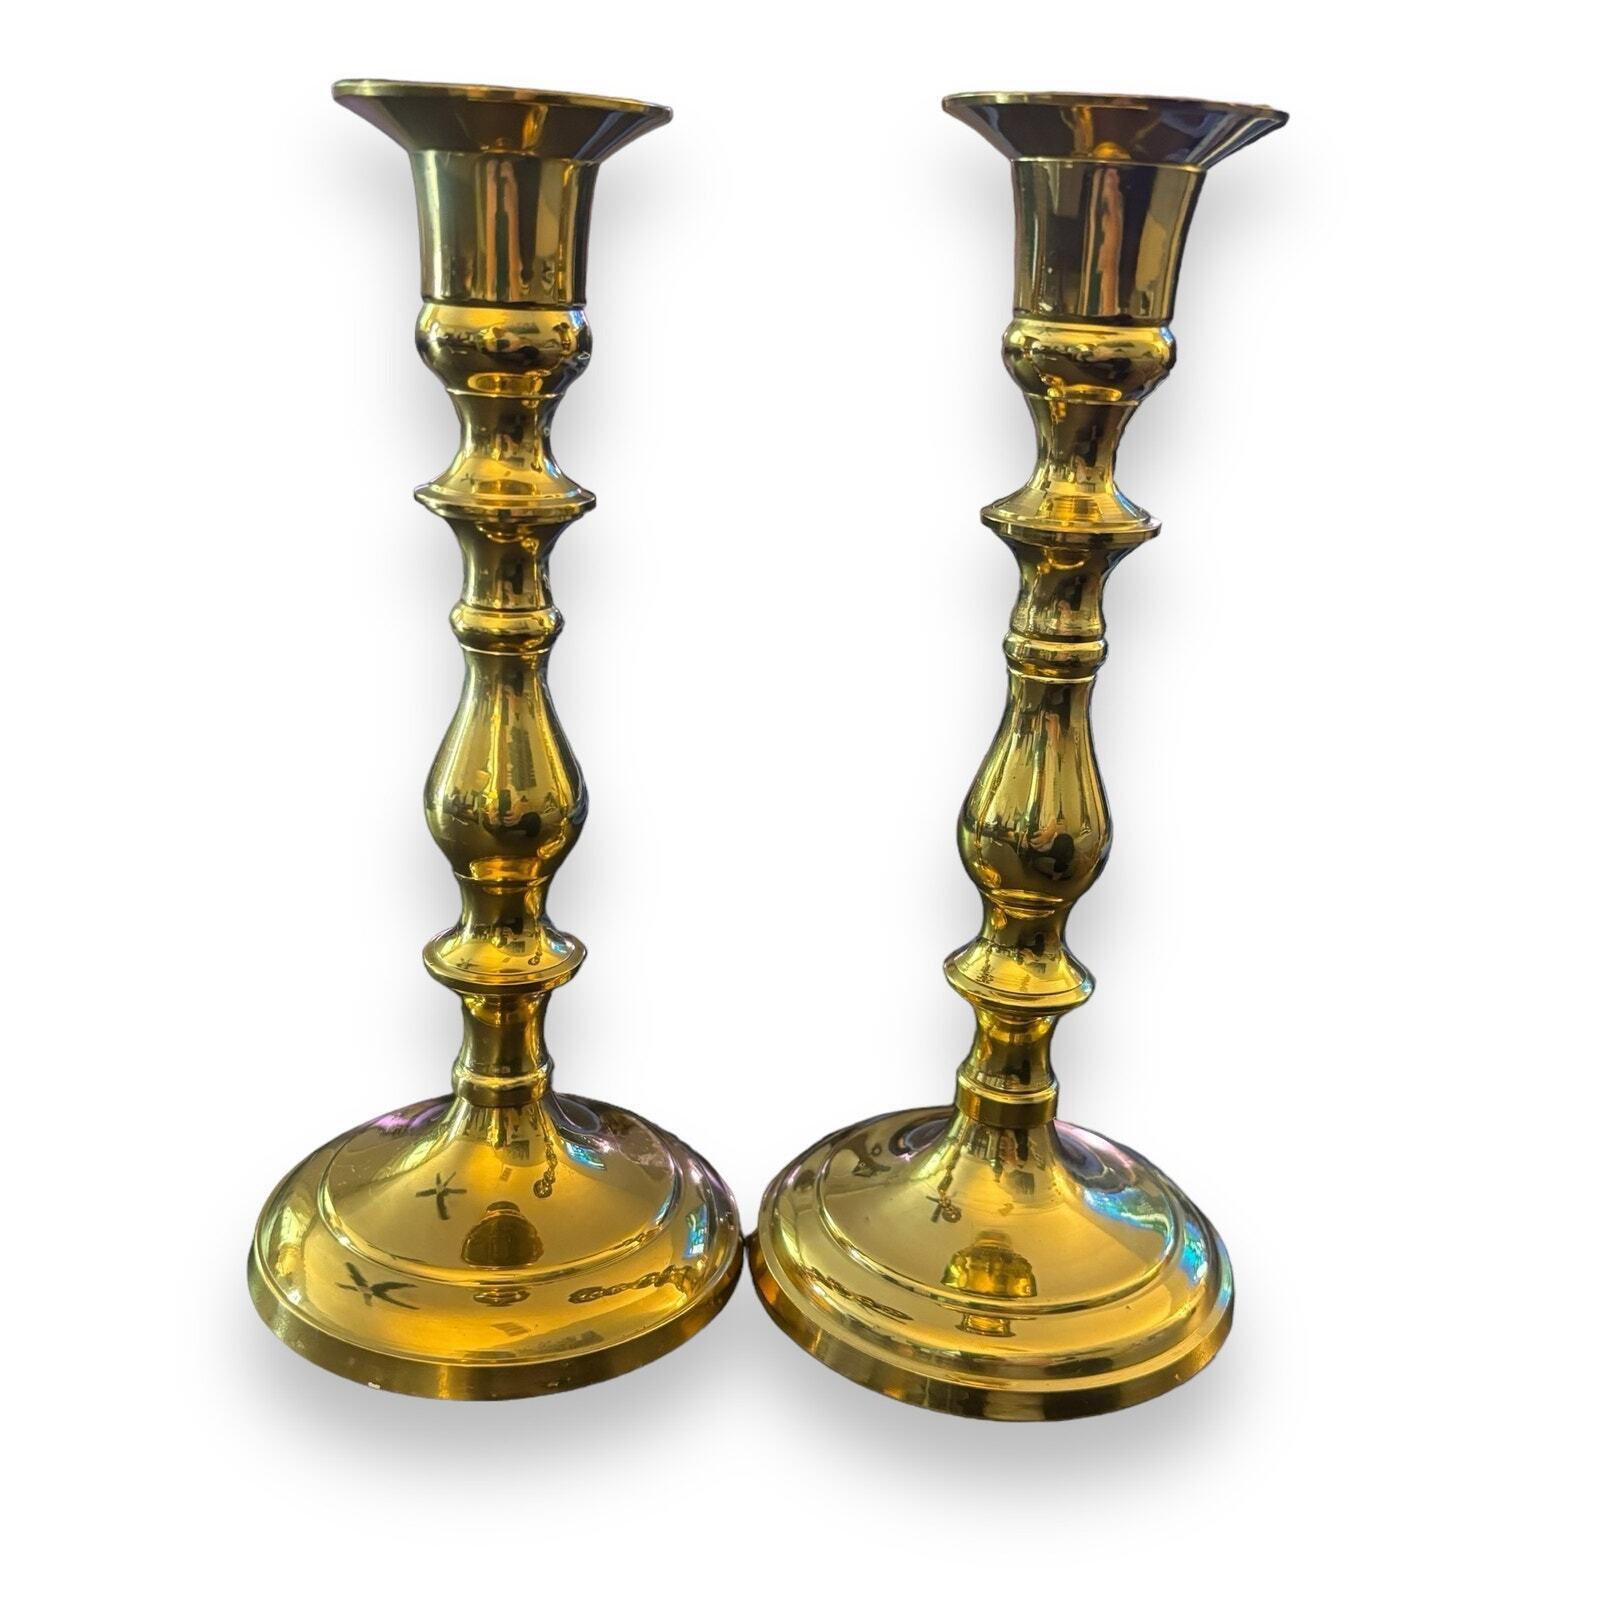 Vintage Matching Pair of Polished Brass Candlestick Holders For Taper Candles 